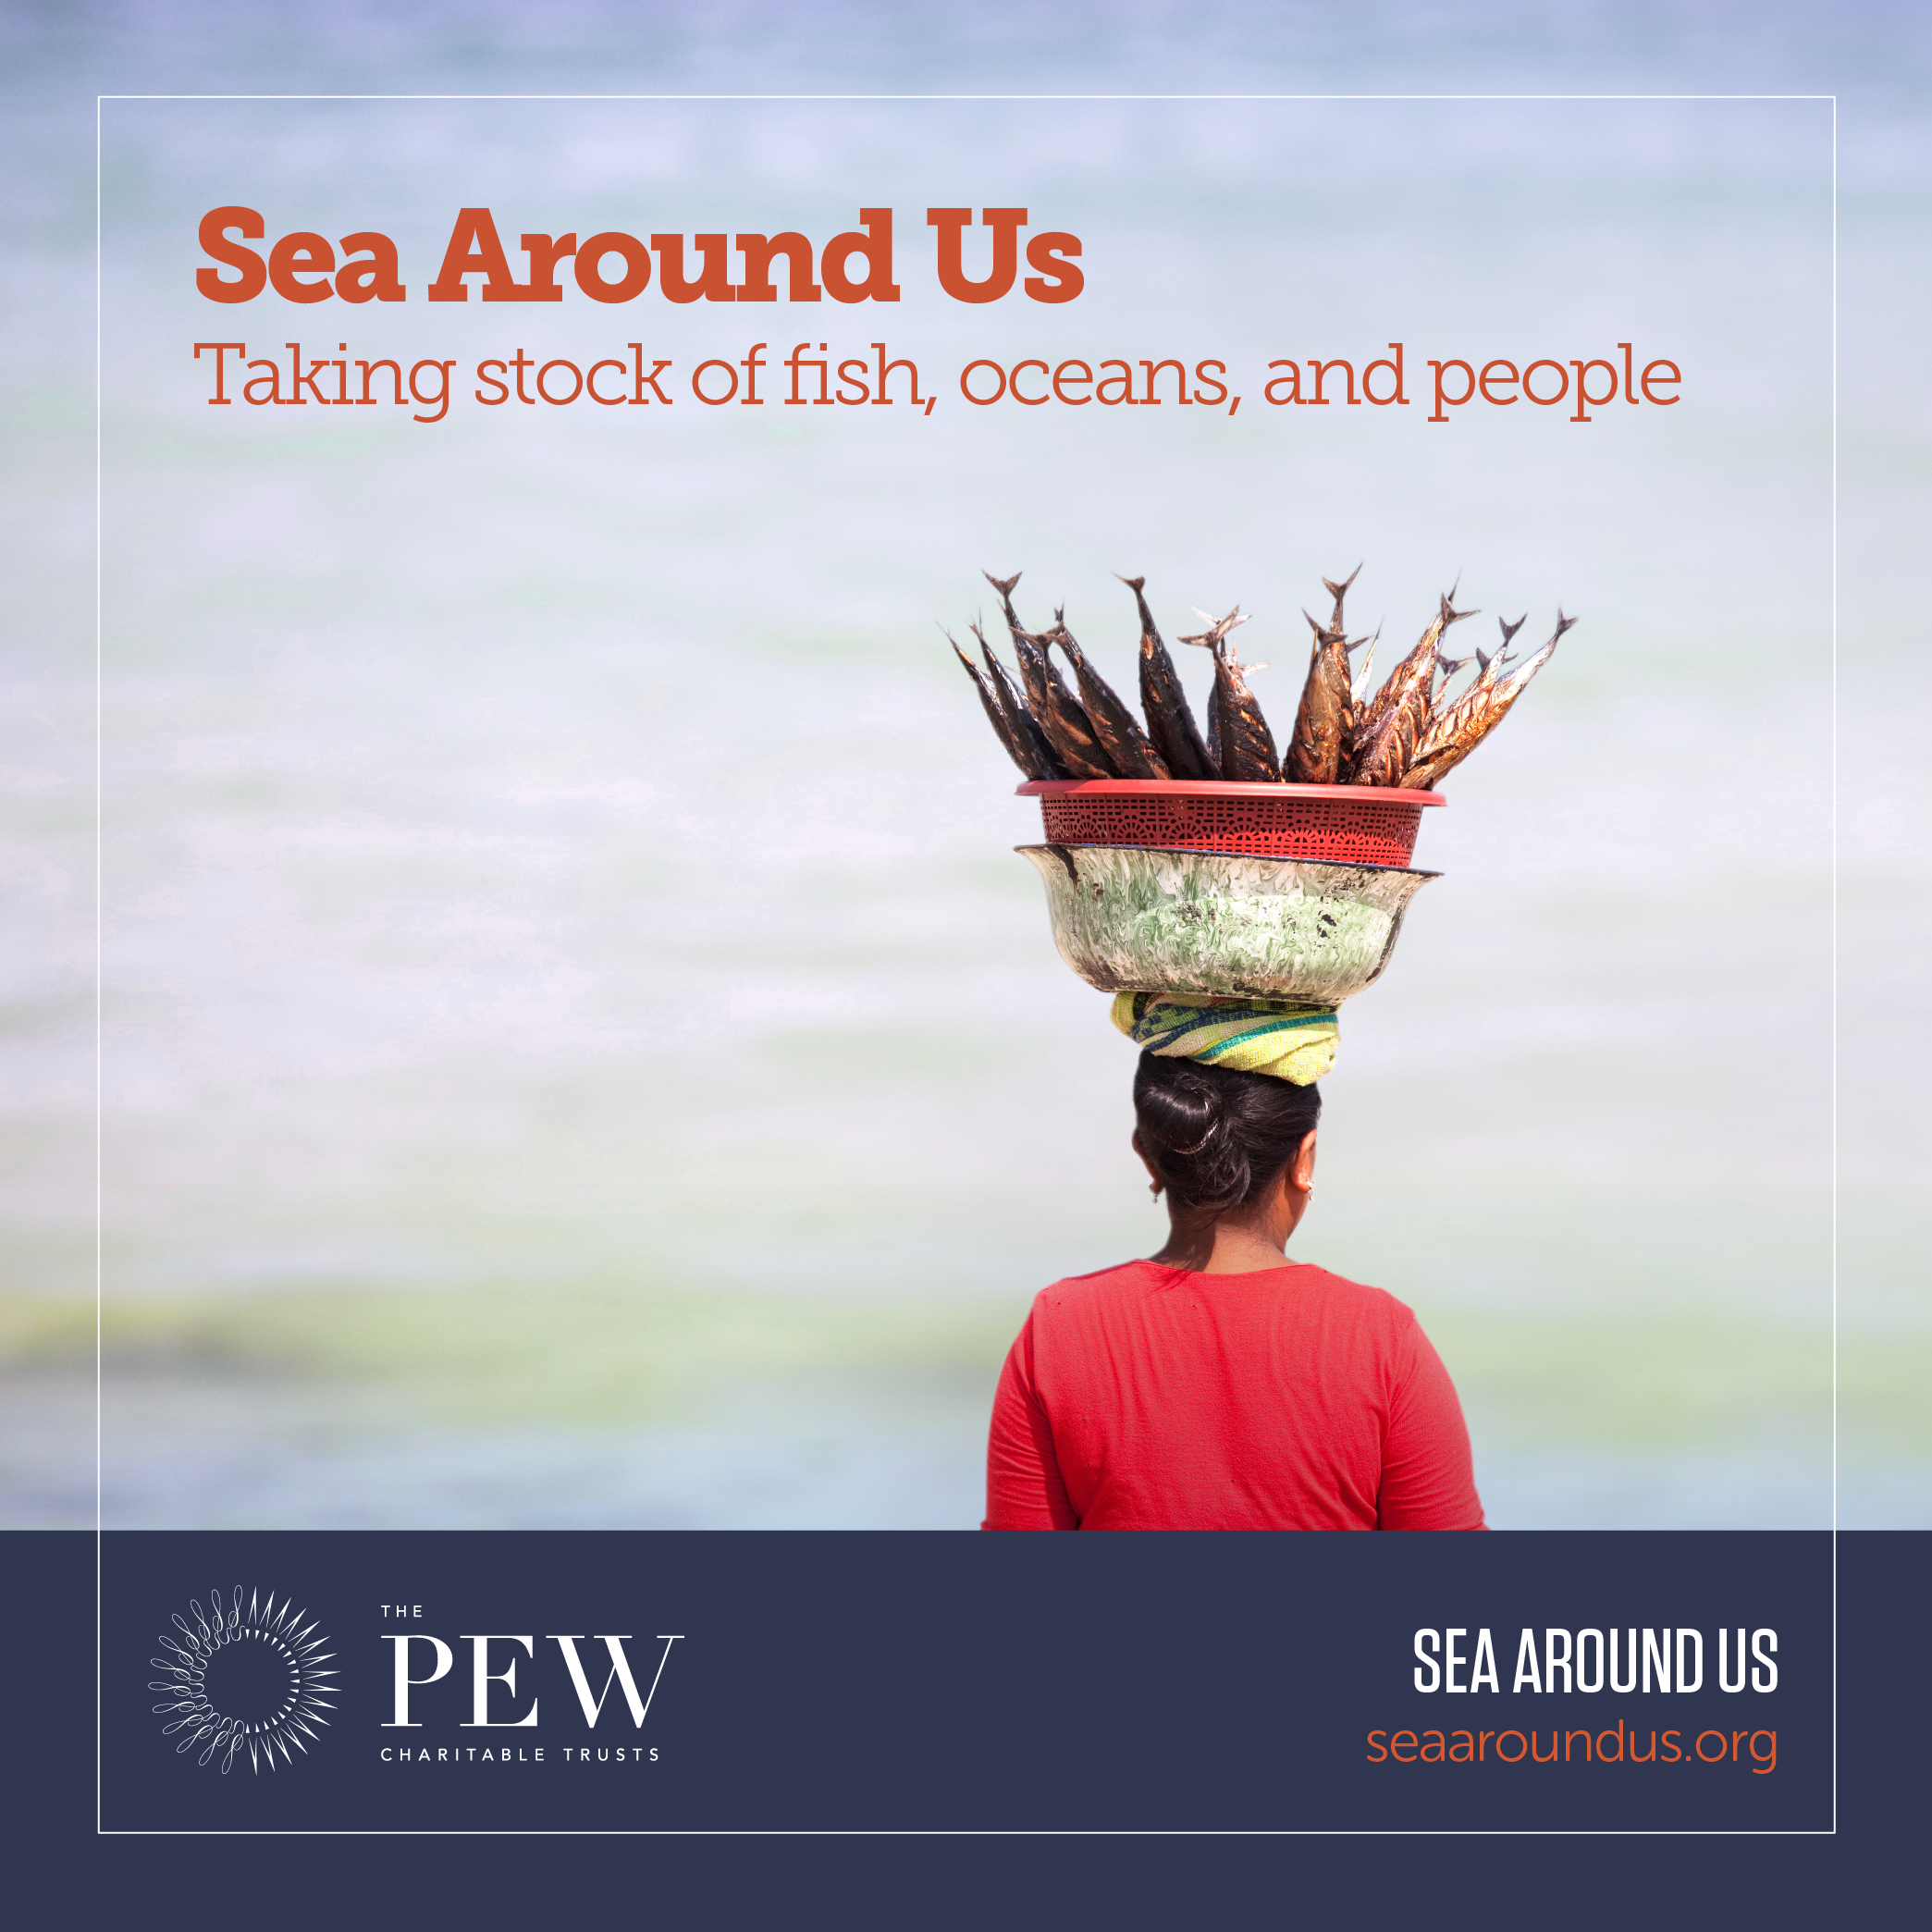 The Sea Around Us: Taking Stock of Our Fish, Oceans, and People